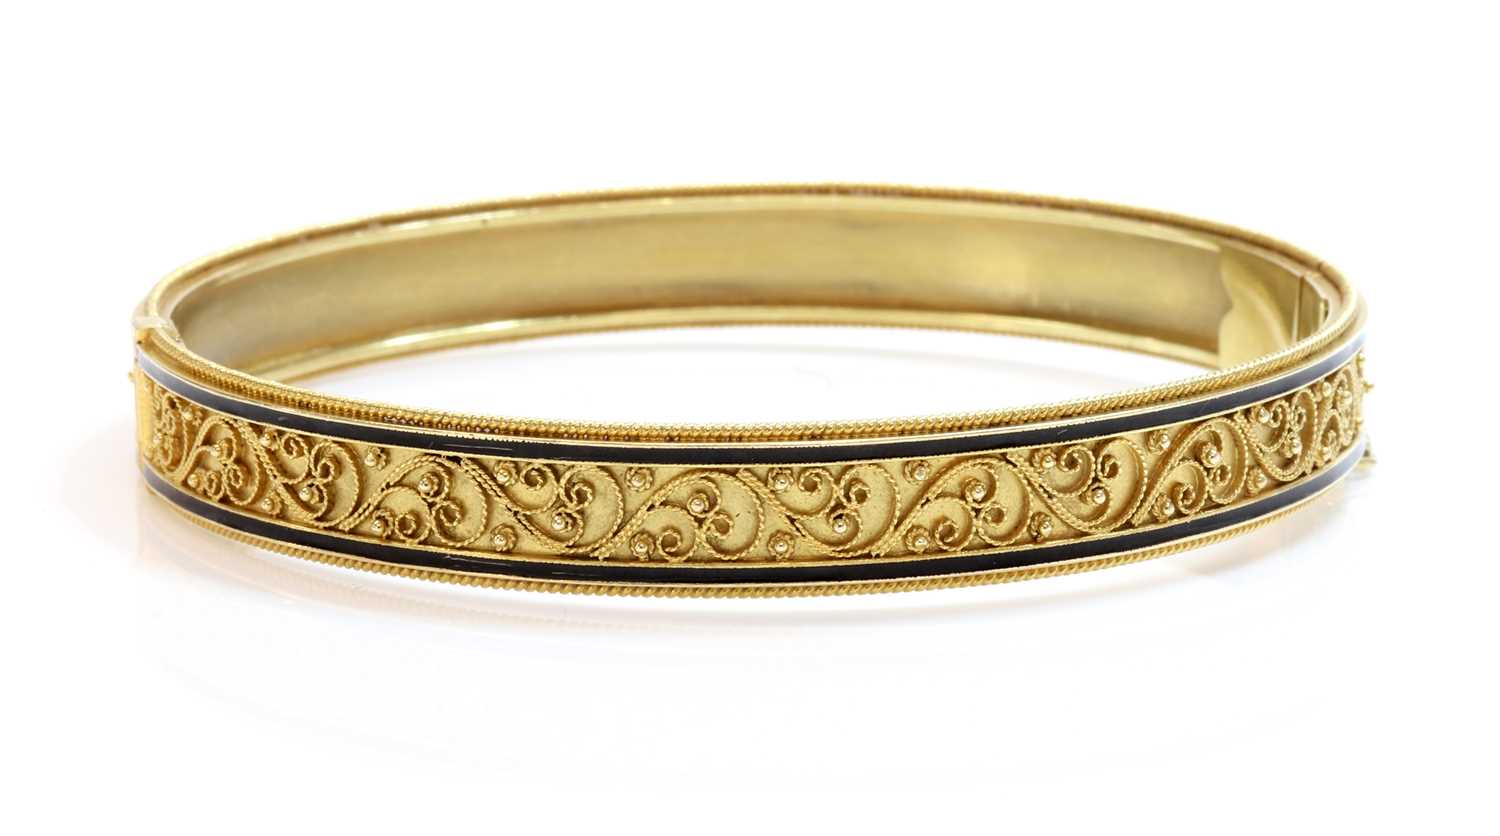 Lot 82 - A Victorian archaeological revival Etruscan style gold and enamel hinged bangle, c.1870